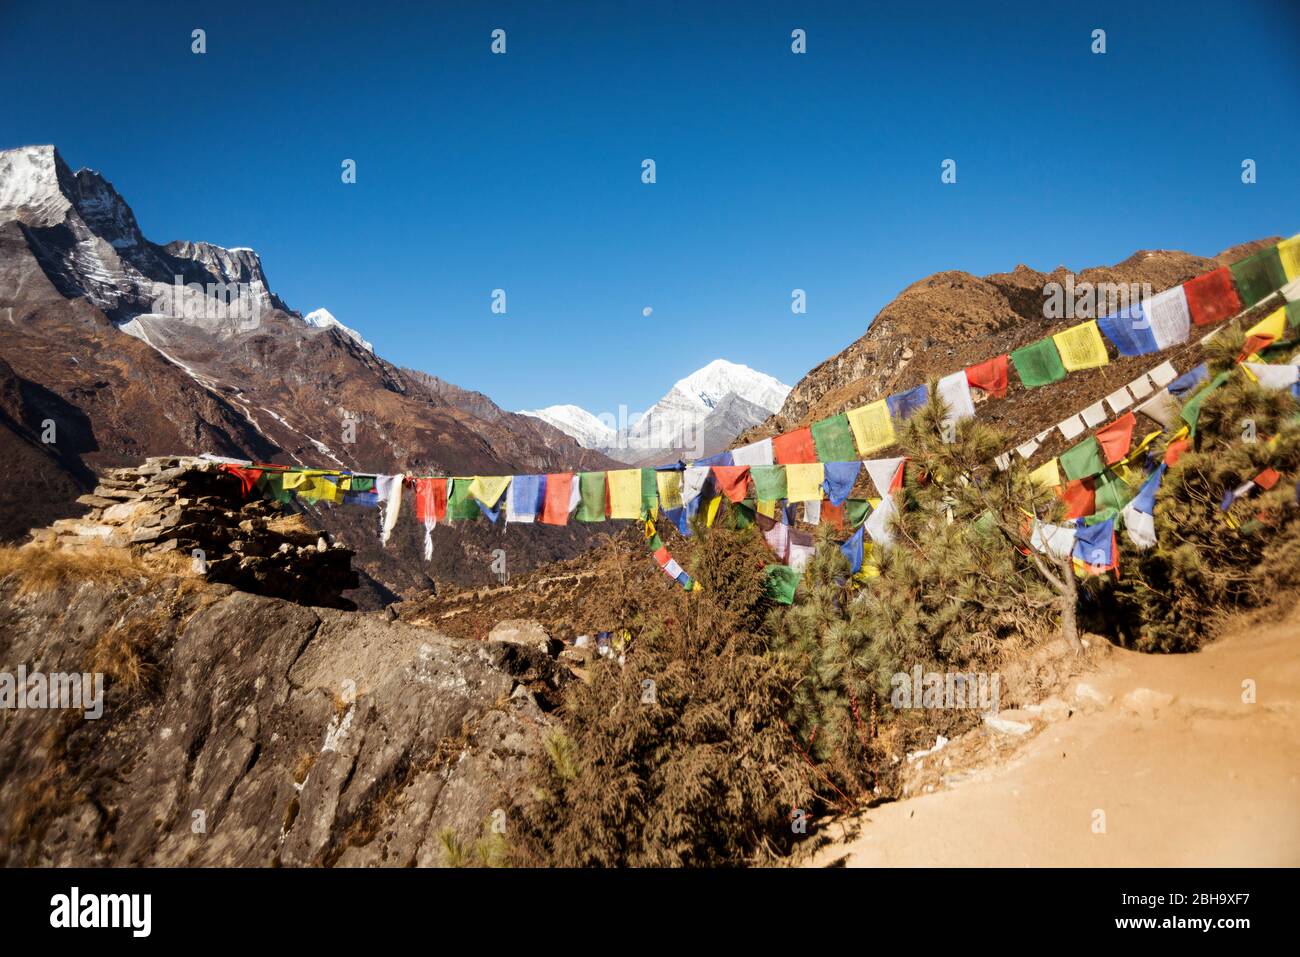 Prayer flag and cairn in the foreground, mountains in the background Stock Photo